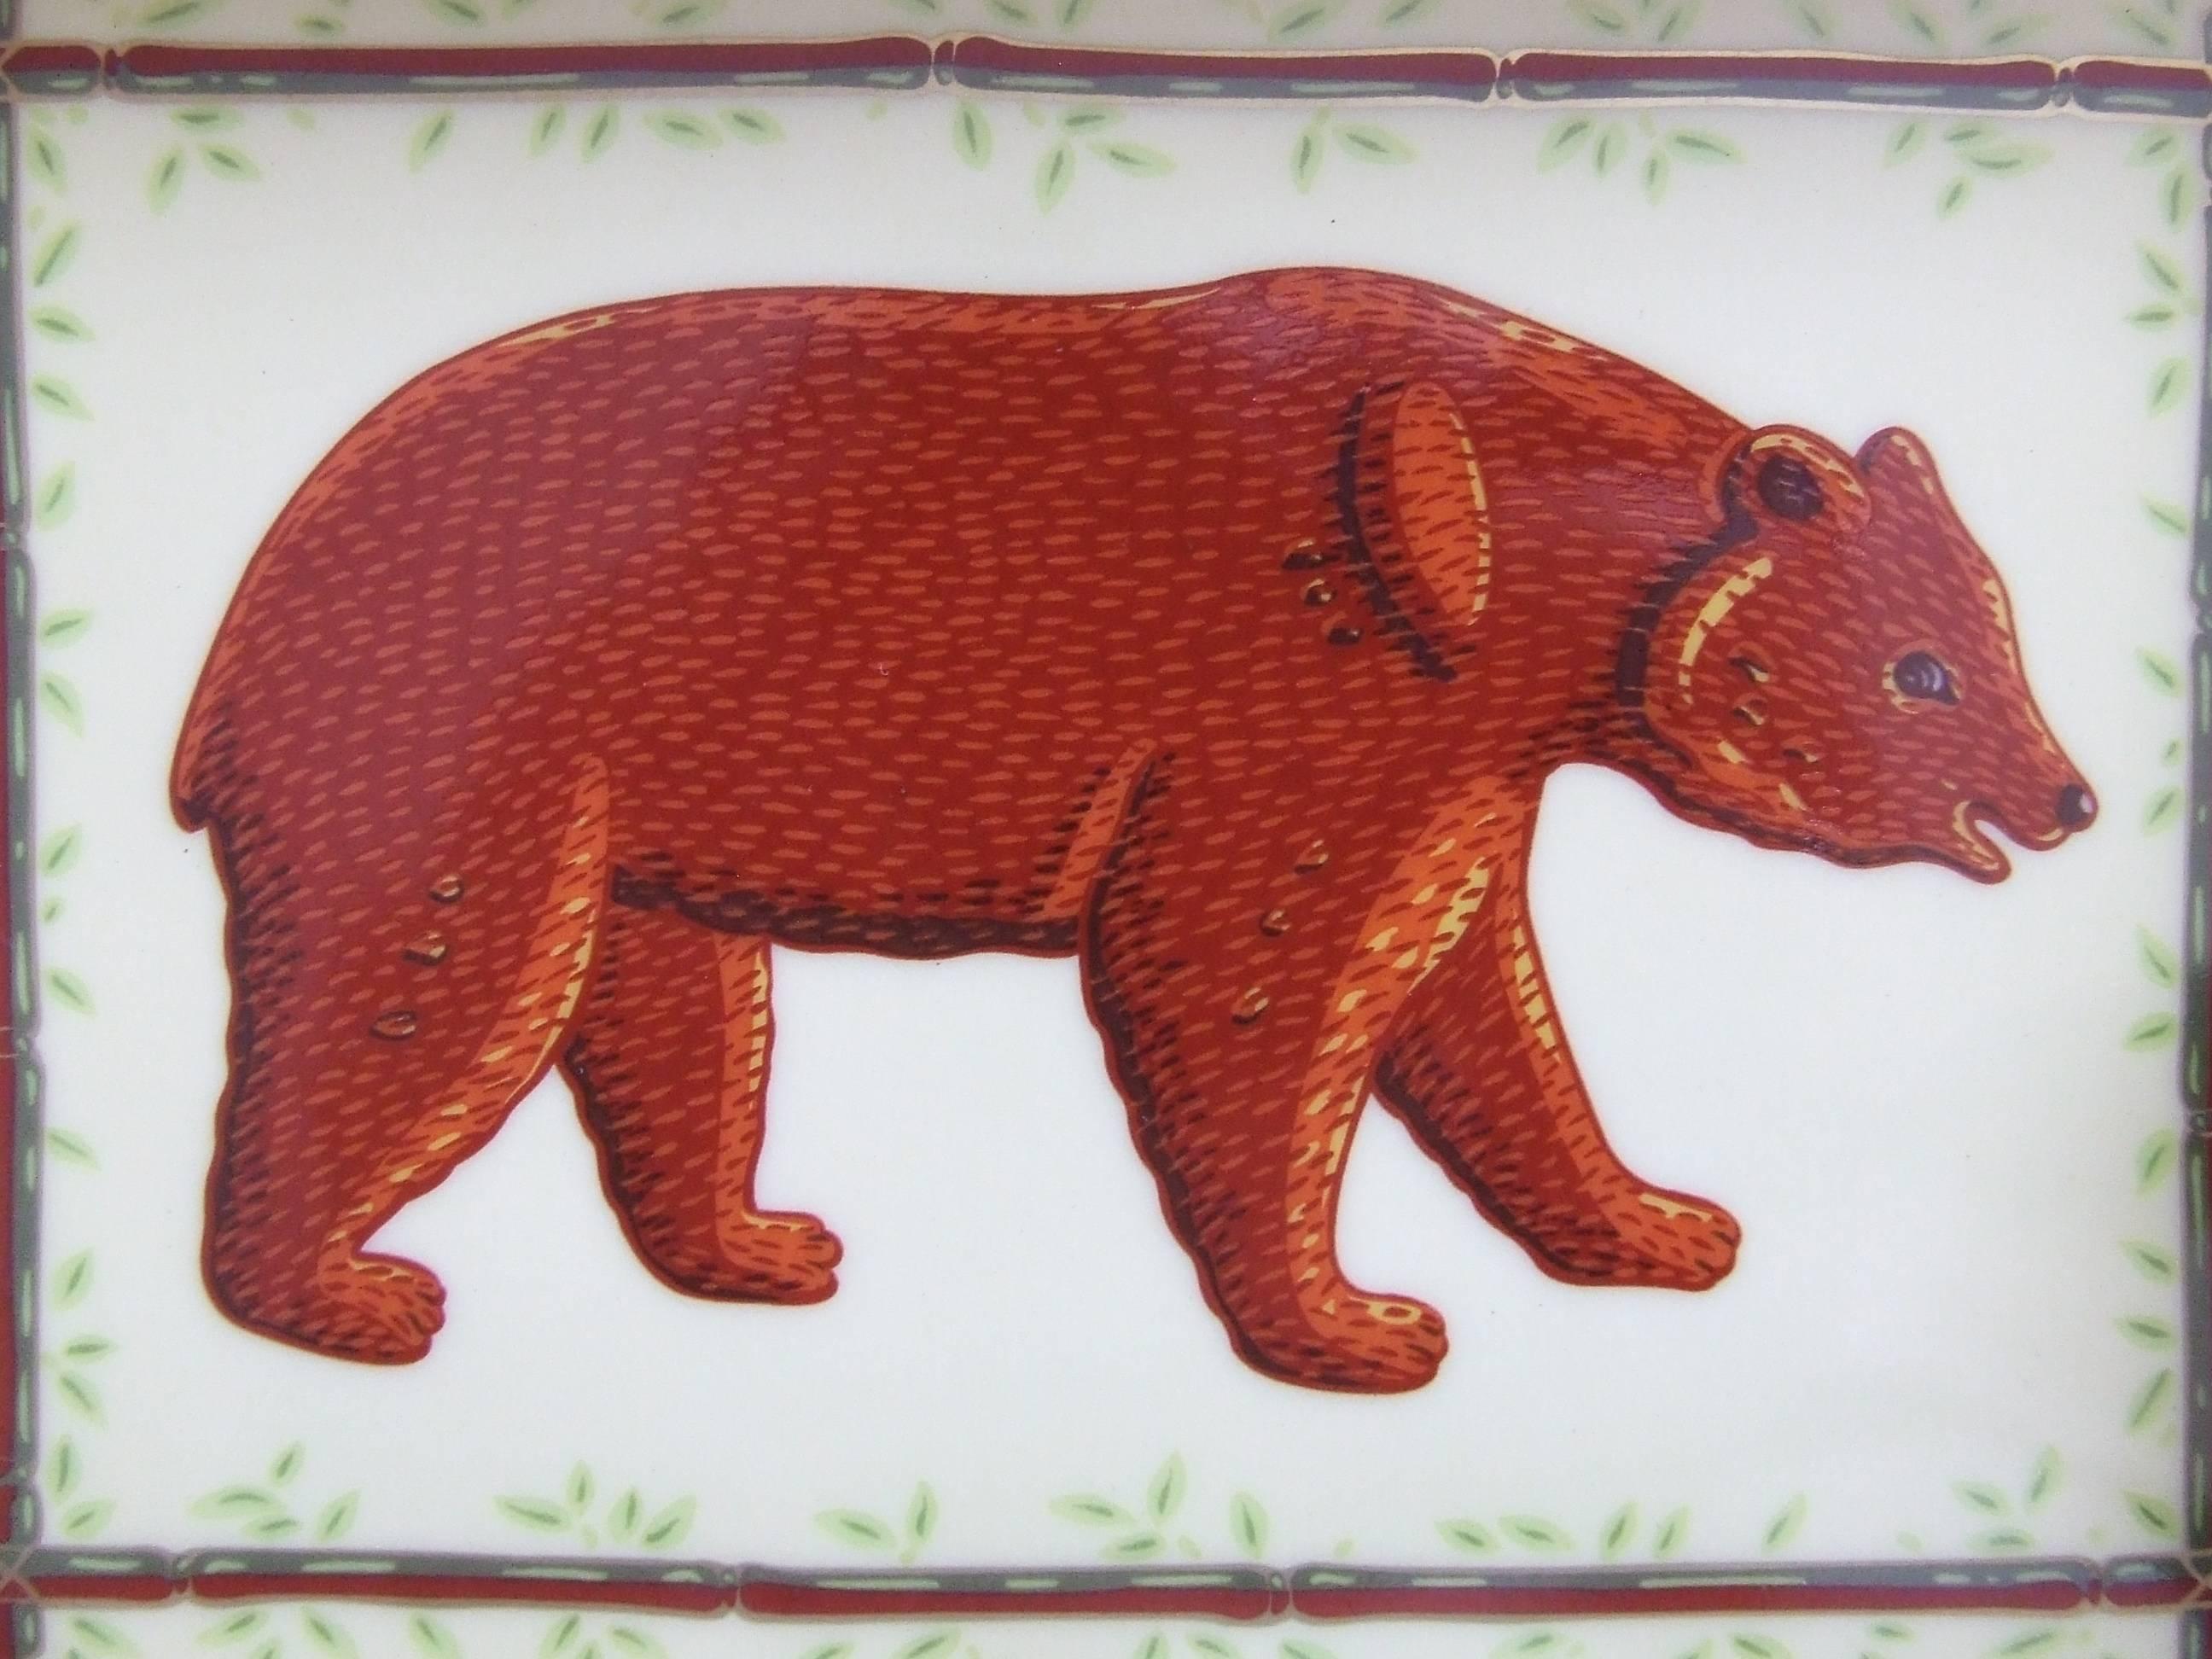 Gorgeous Authentic Hermès Ashtray

Pattern: Bear in a bamboo decor

Made in France

Made of Printed Porcelain

Bottom is covered with beige suede

Colorways: Pale Yellow Background, Brown Bear, Green and Brown bamboo, Golden Border. 

